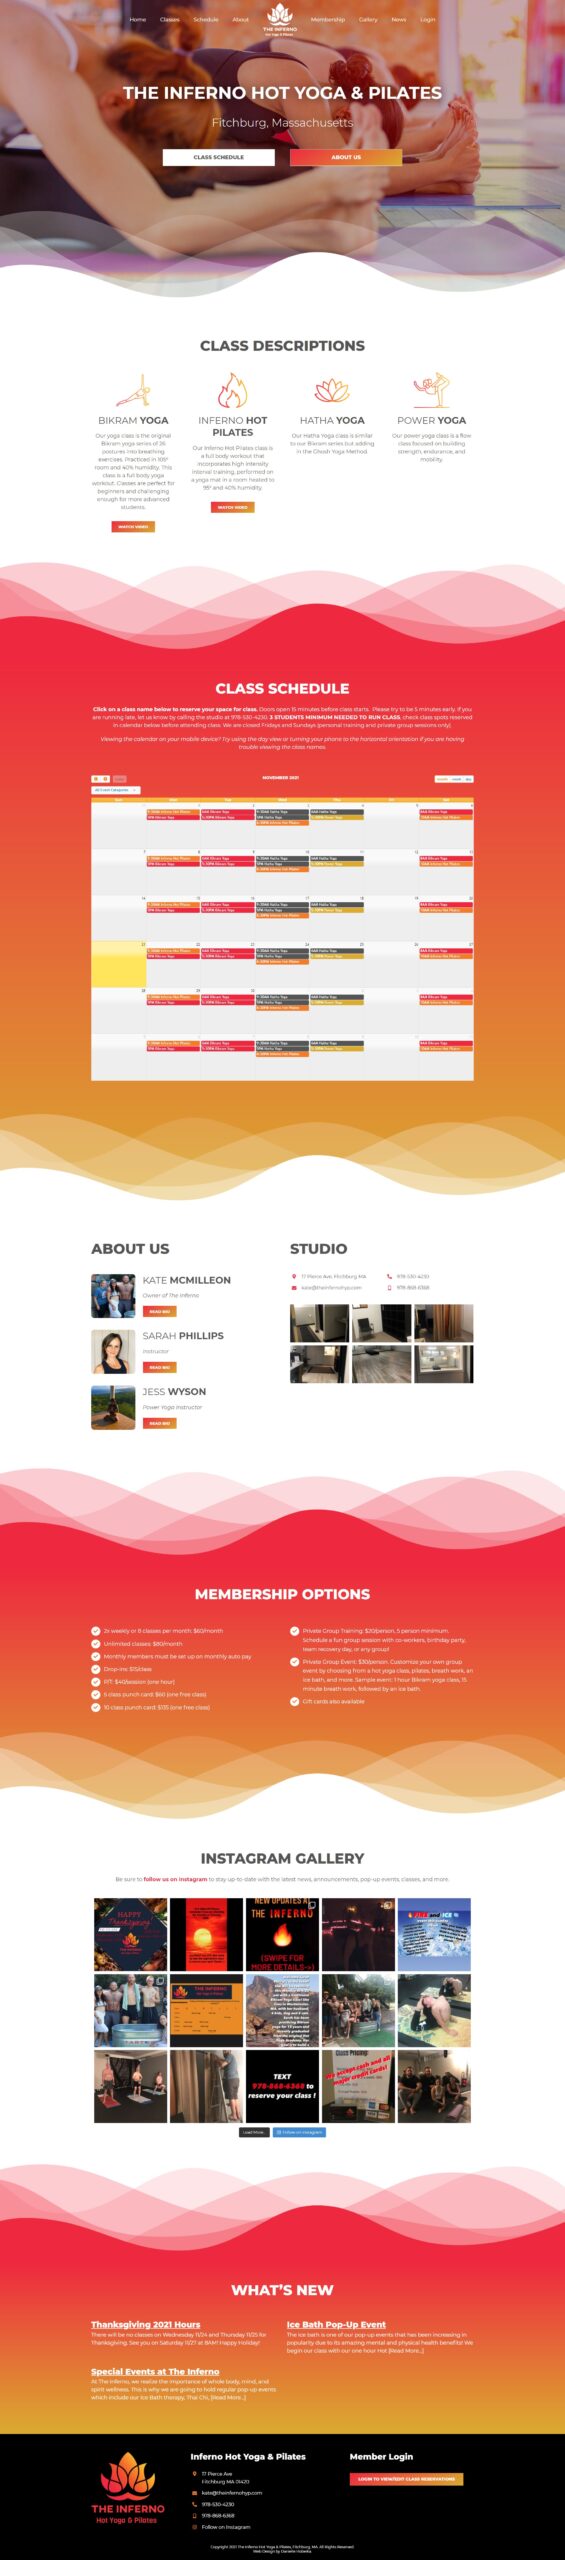 Website Design for The Inferno Hot Yoga & Pilates in Fitchburg, MA